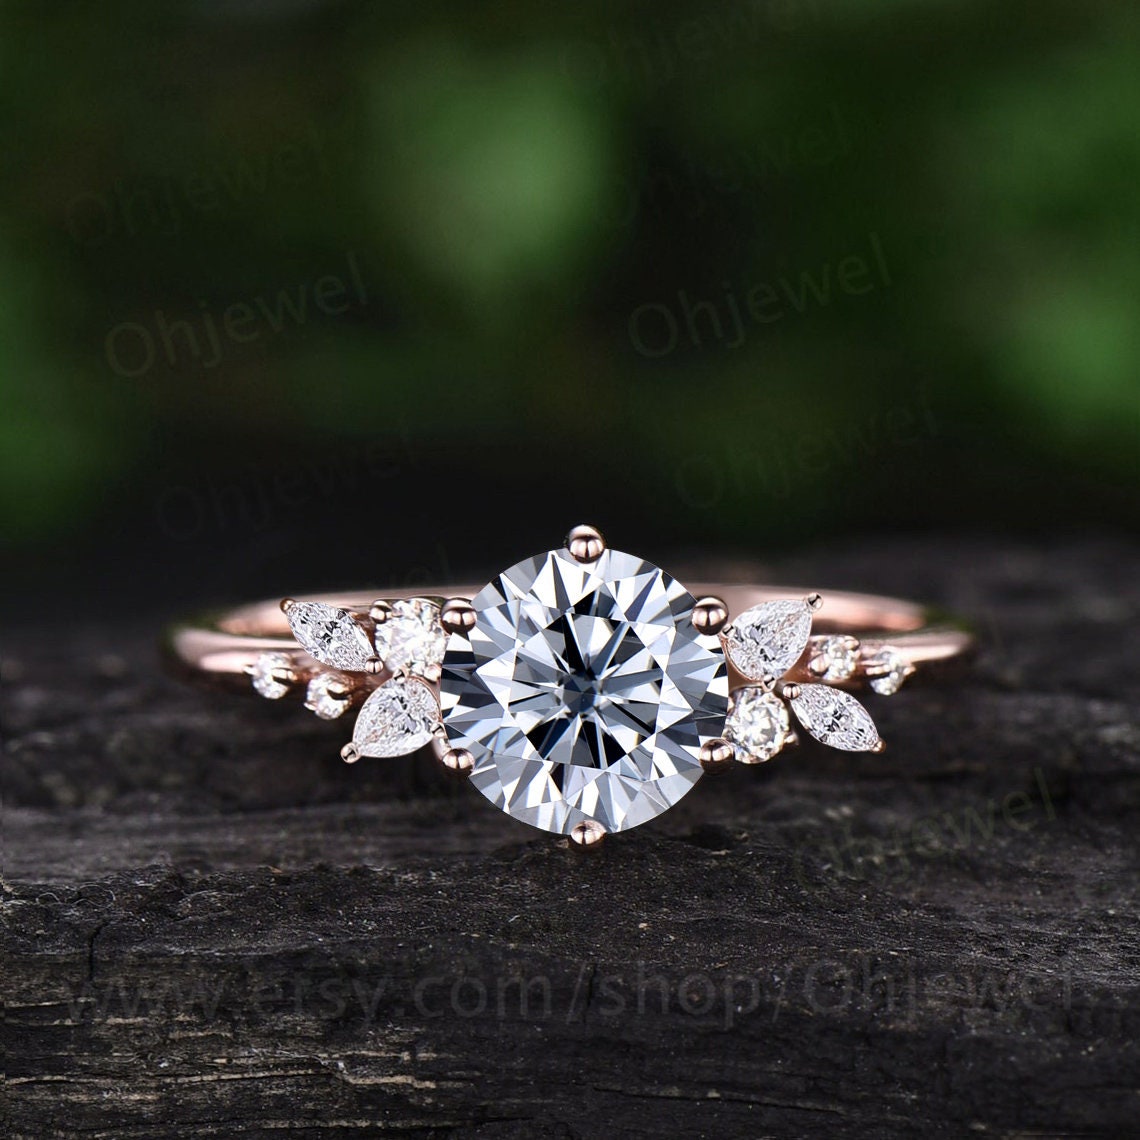 Vintage round gray moissanite engagement ring solid rose gold cluster snowdrift diamond ring unique bridal promise wedding ring women gift